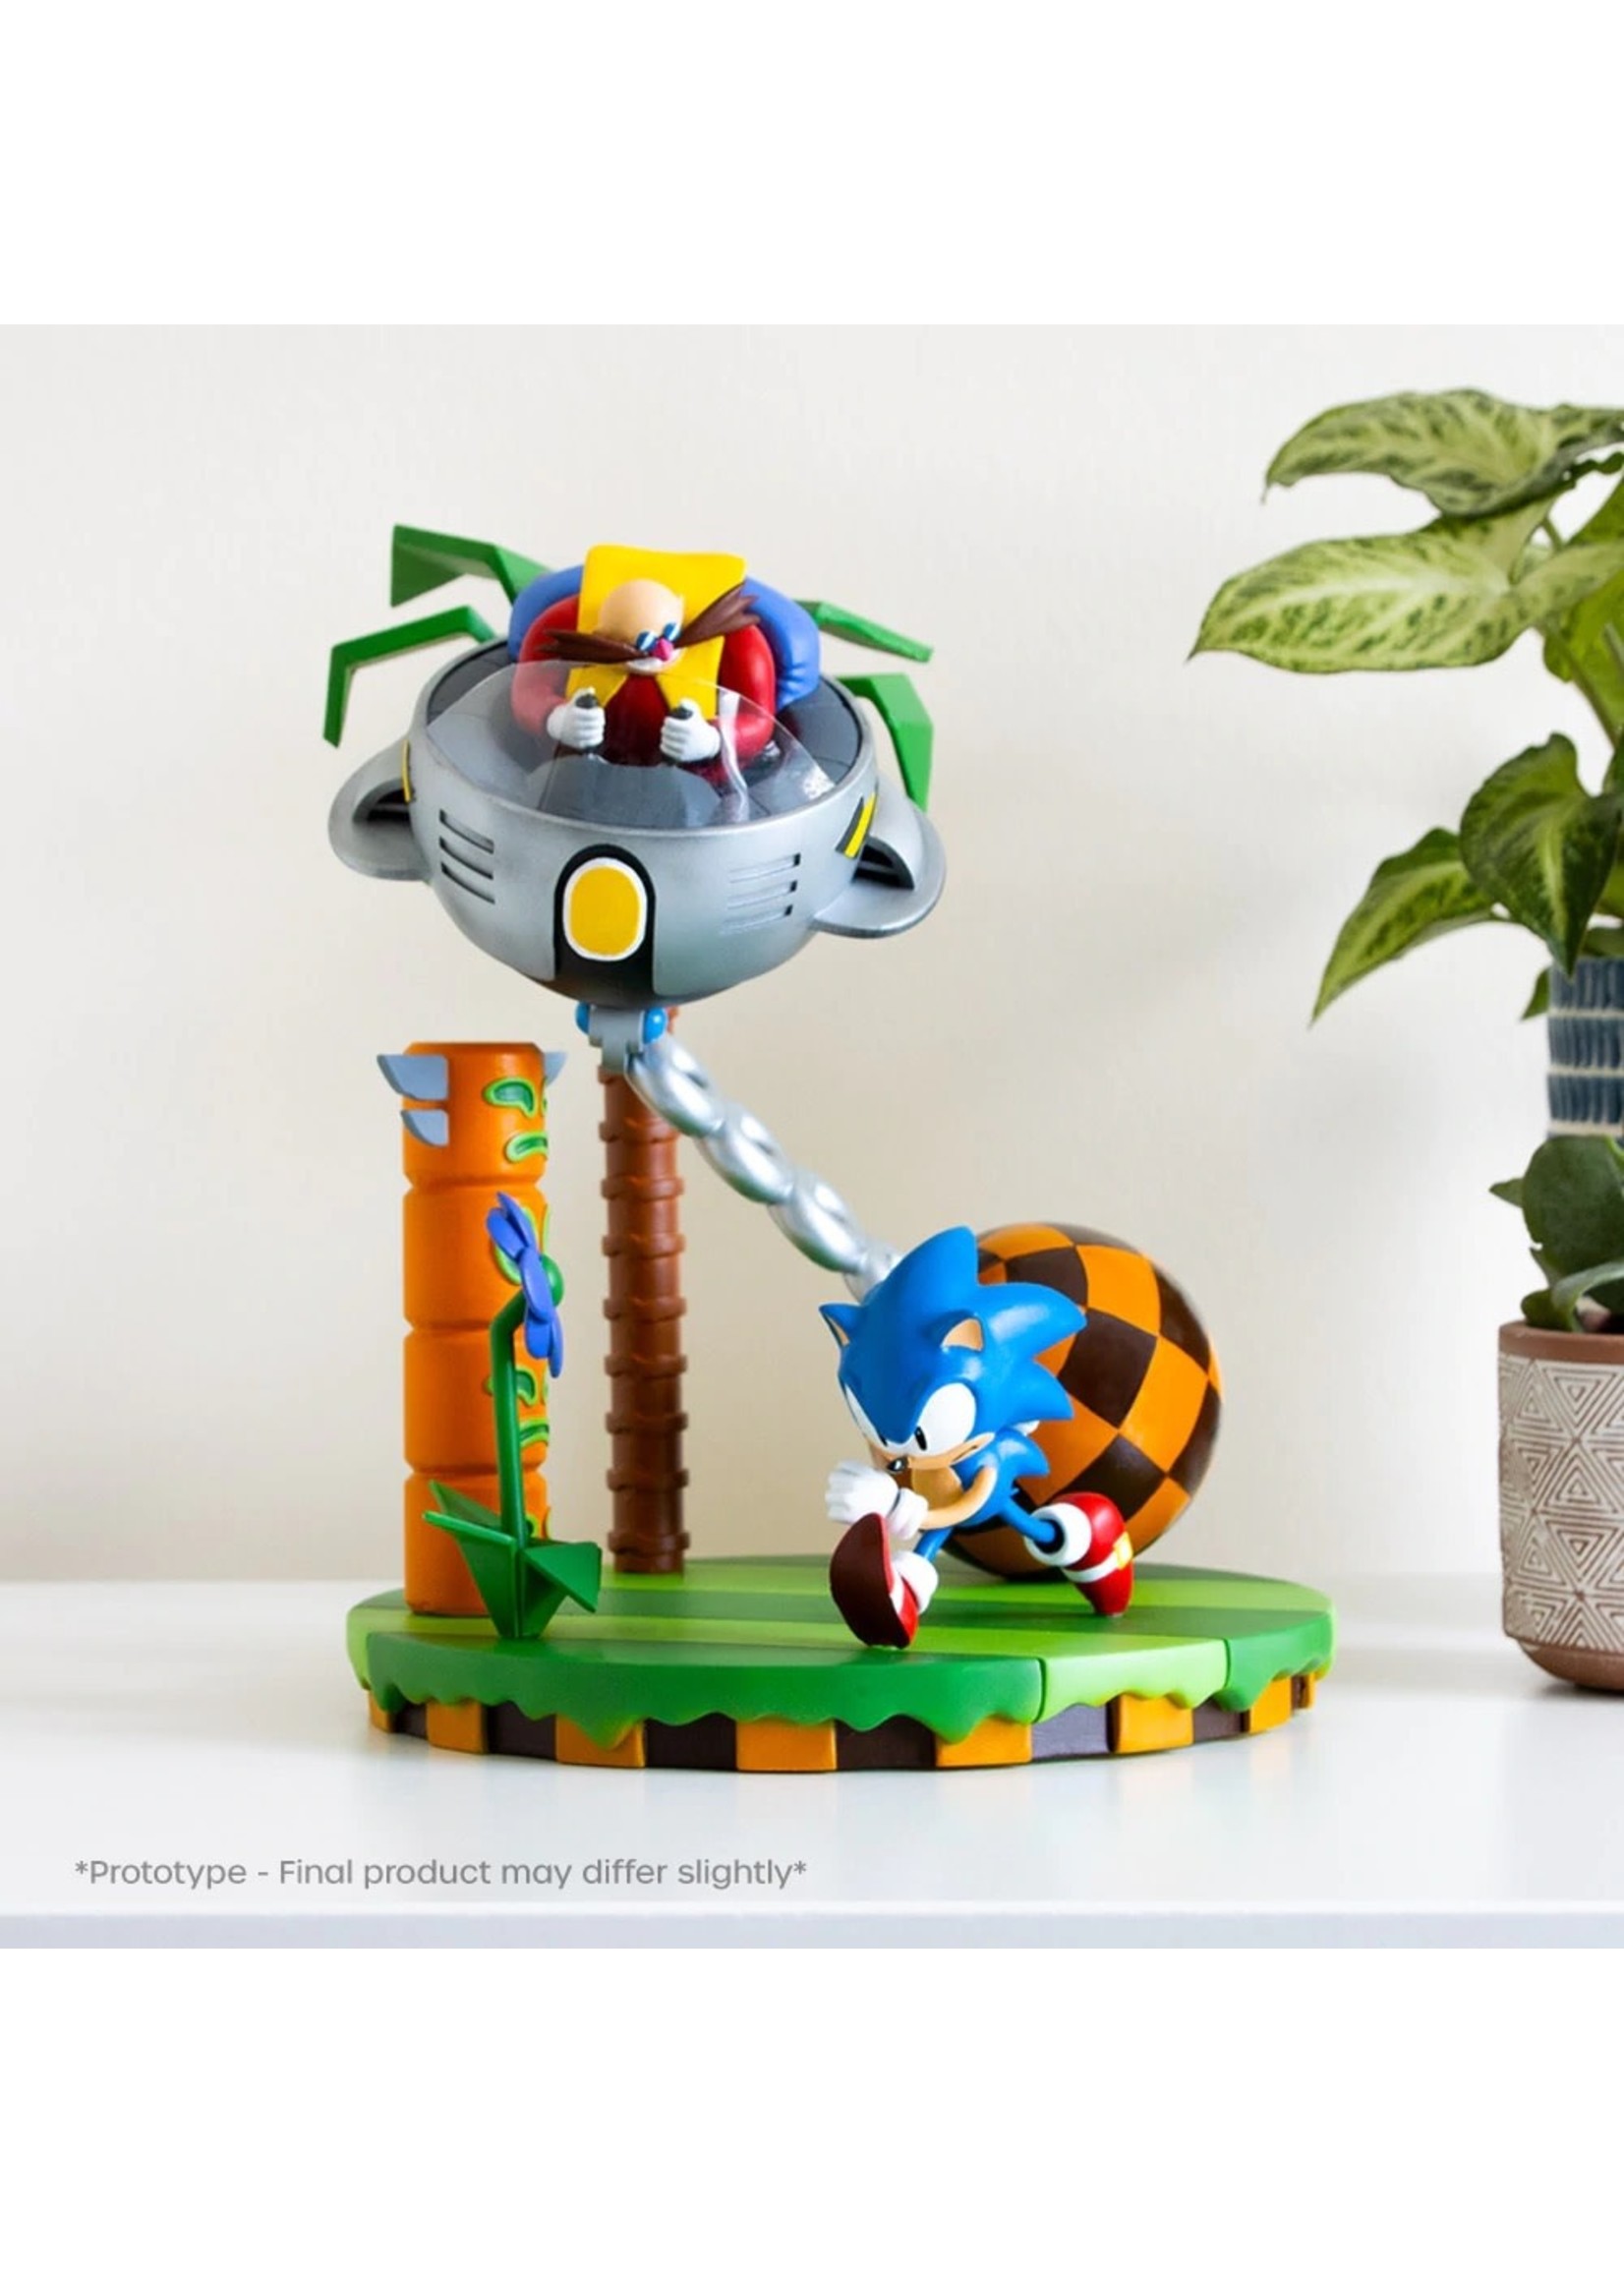 Official Sonic The Hedgehog 30th Anniversary Statue